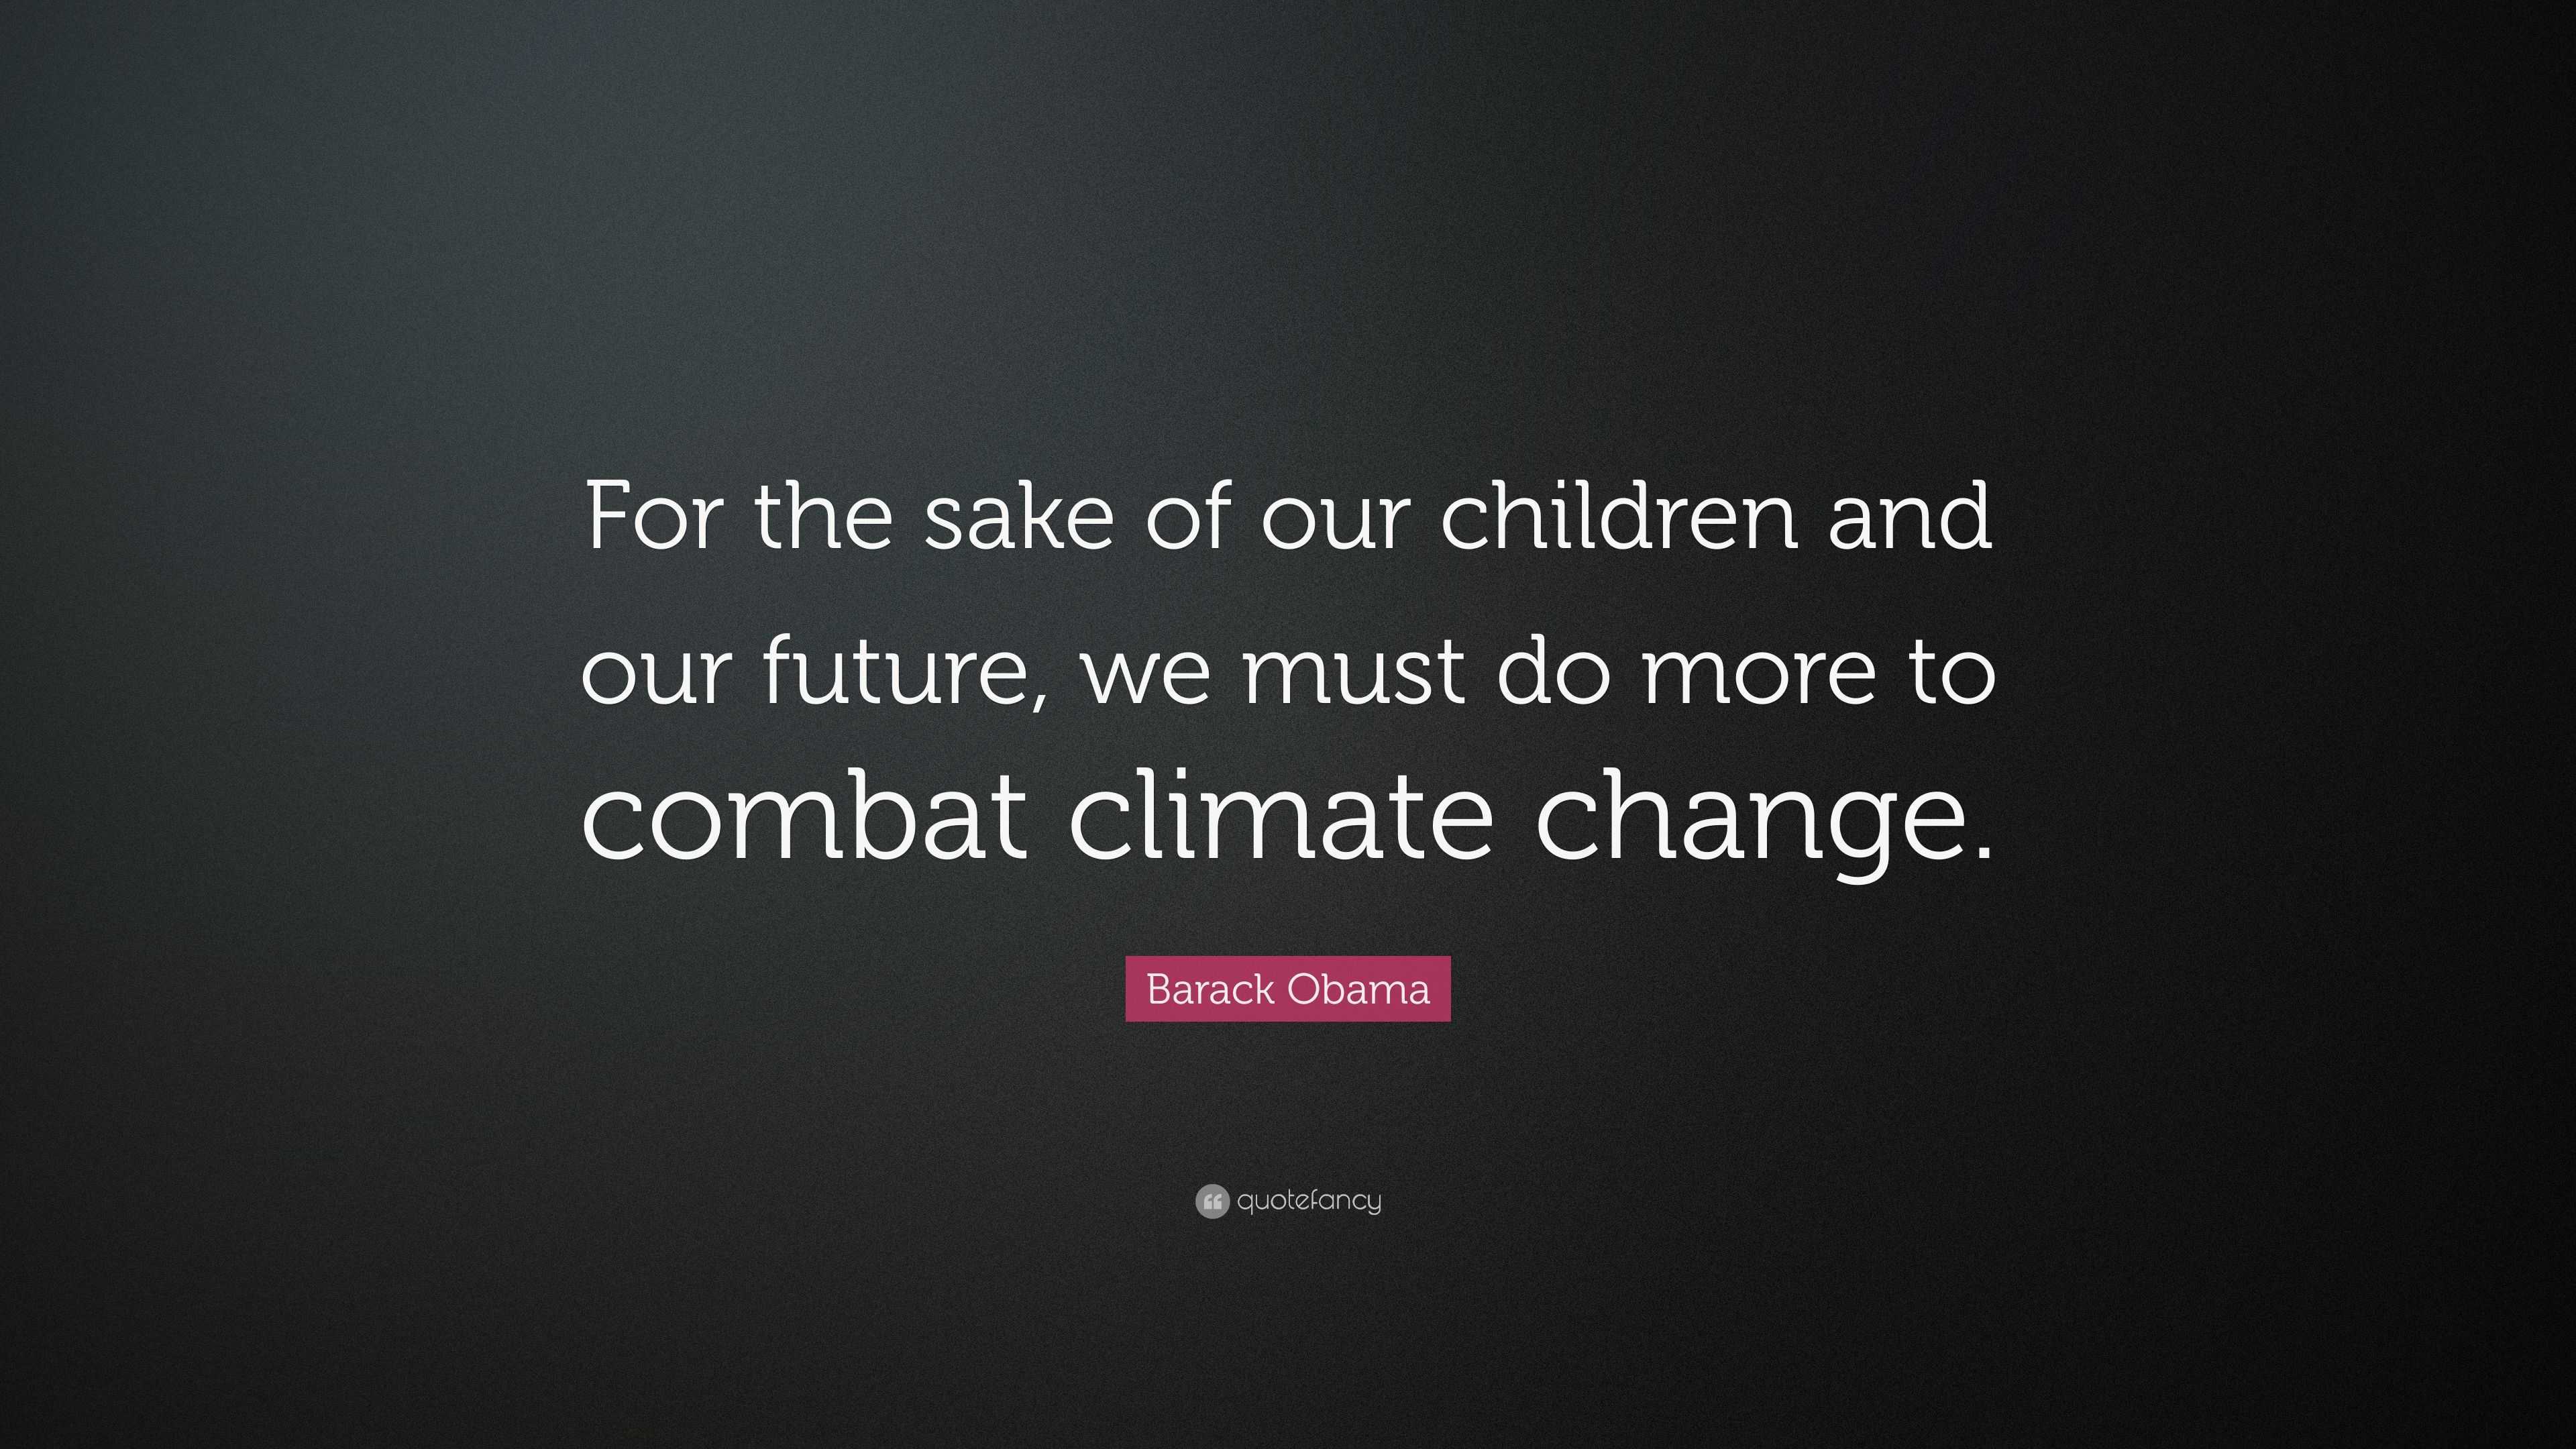 Barack Obama Quote: "For the sake of our children and our ...